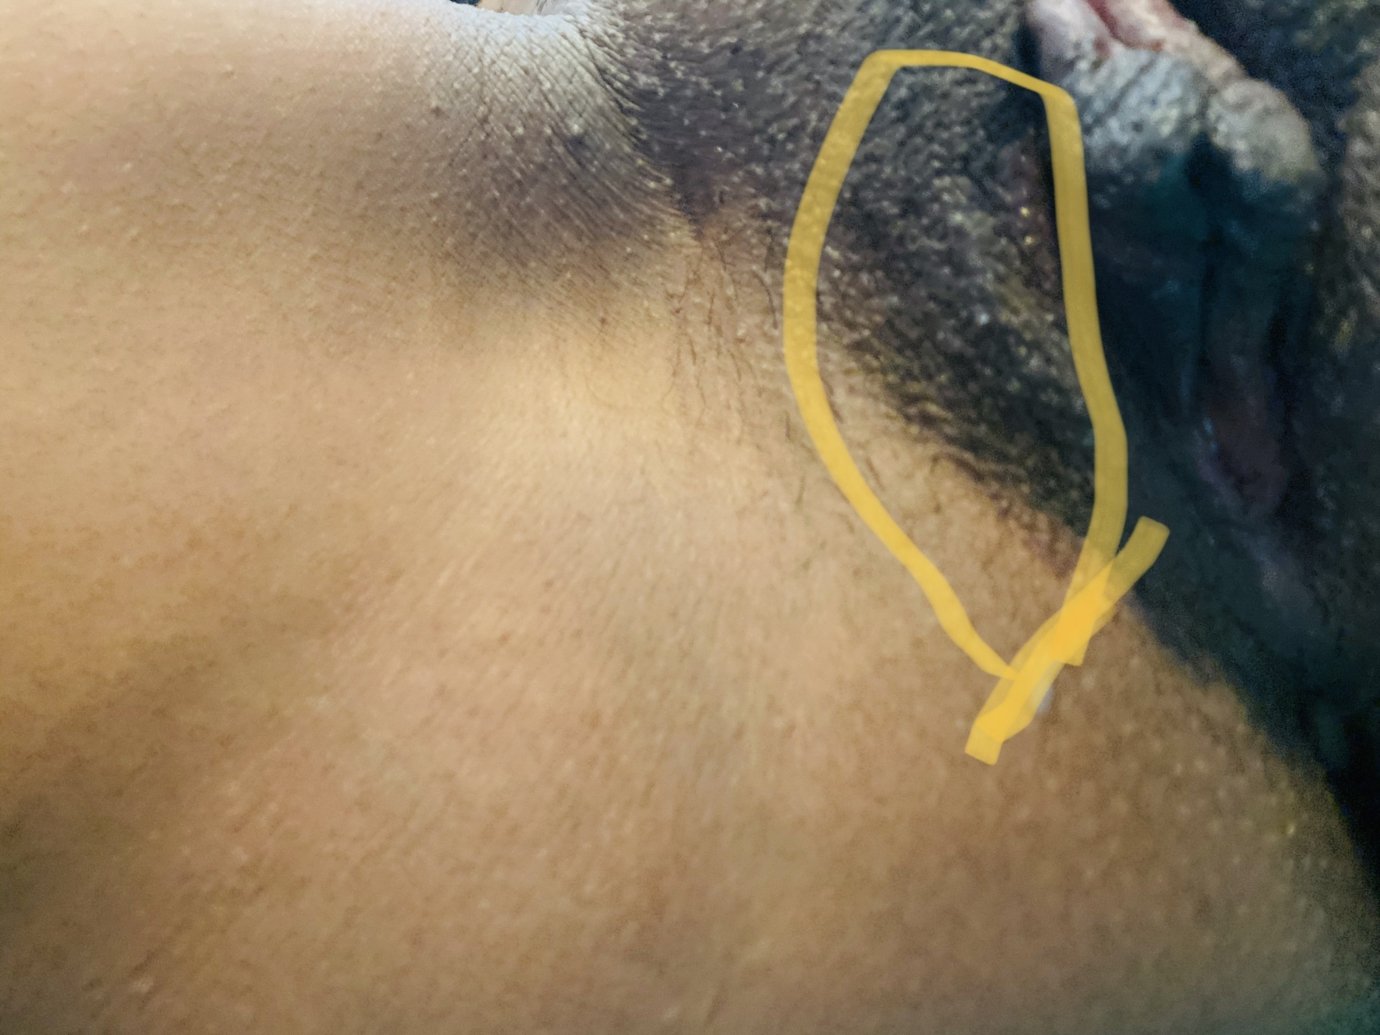 Want to know if its herpes outbreak. Pls help!!